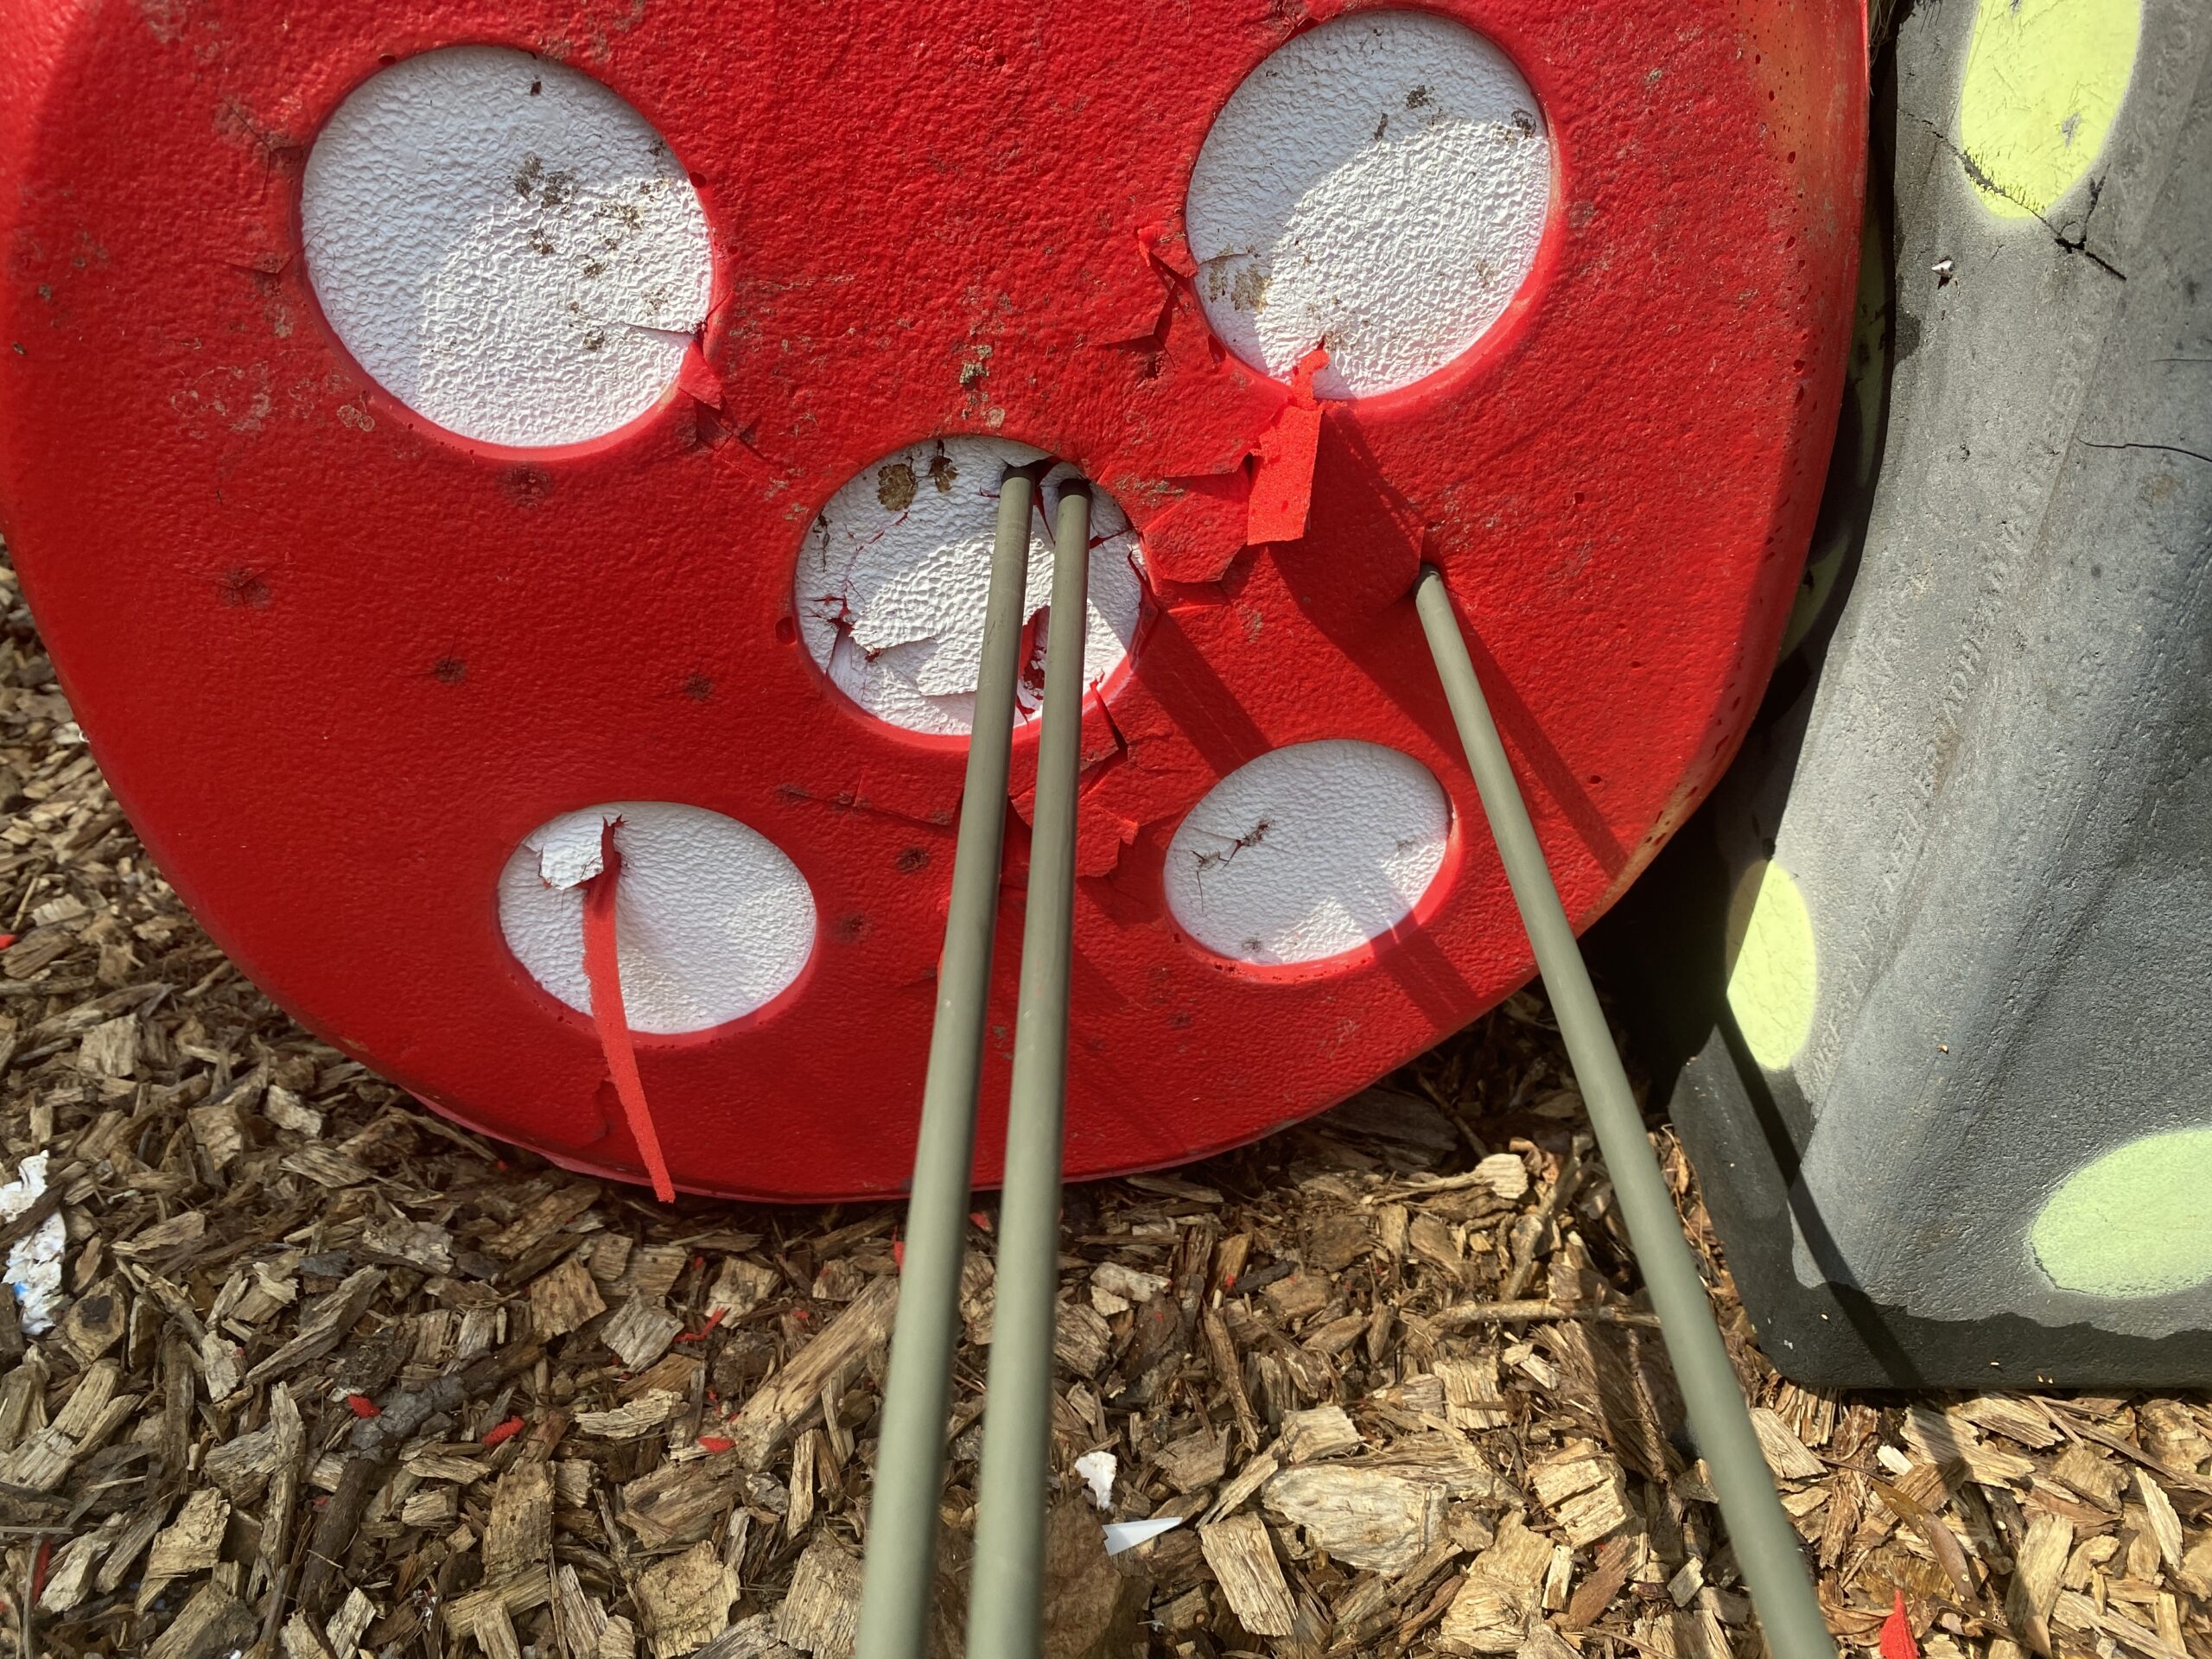 Two arrows hit the bullseye and one did not.